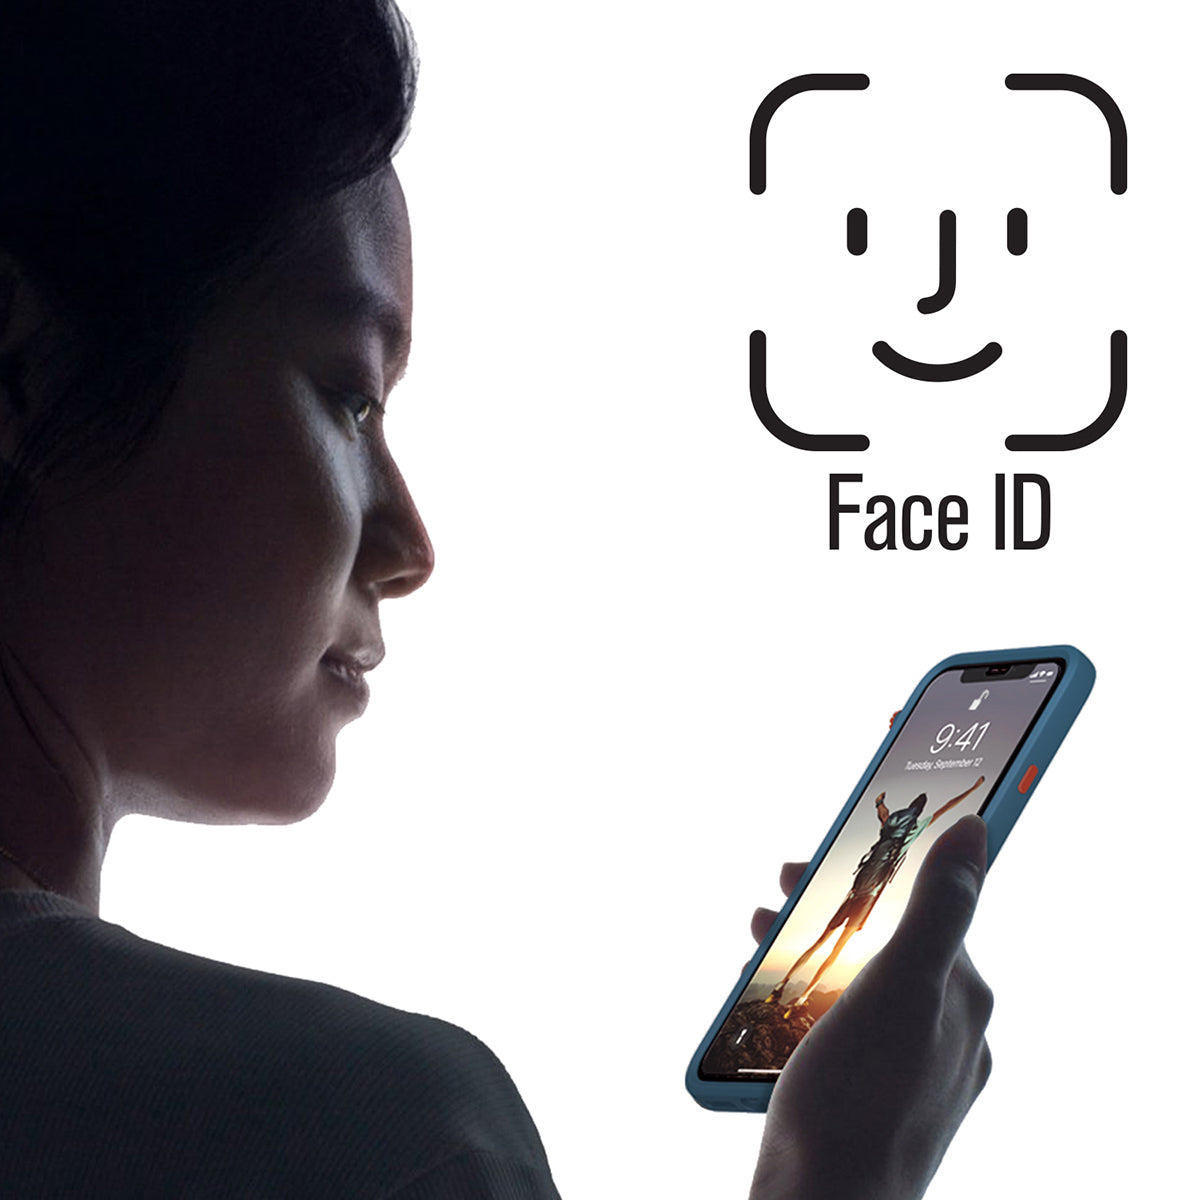 Catalyst Add a Tempered Glass Screen Protector on iphone woman using iphone text reads face id